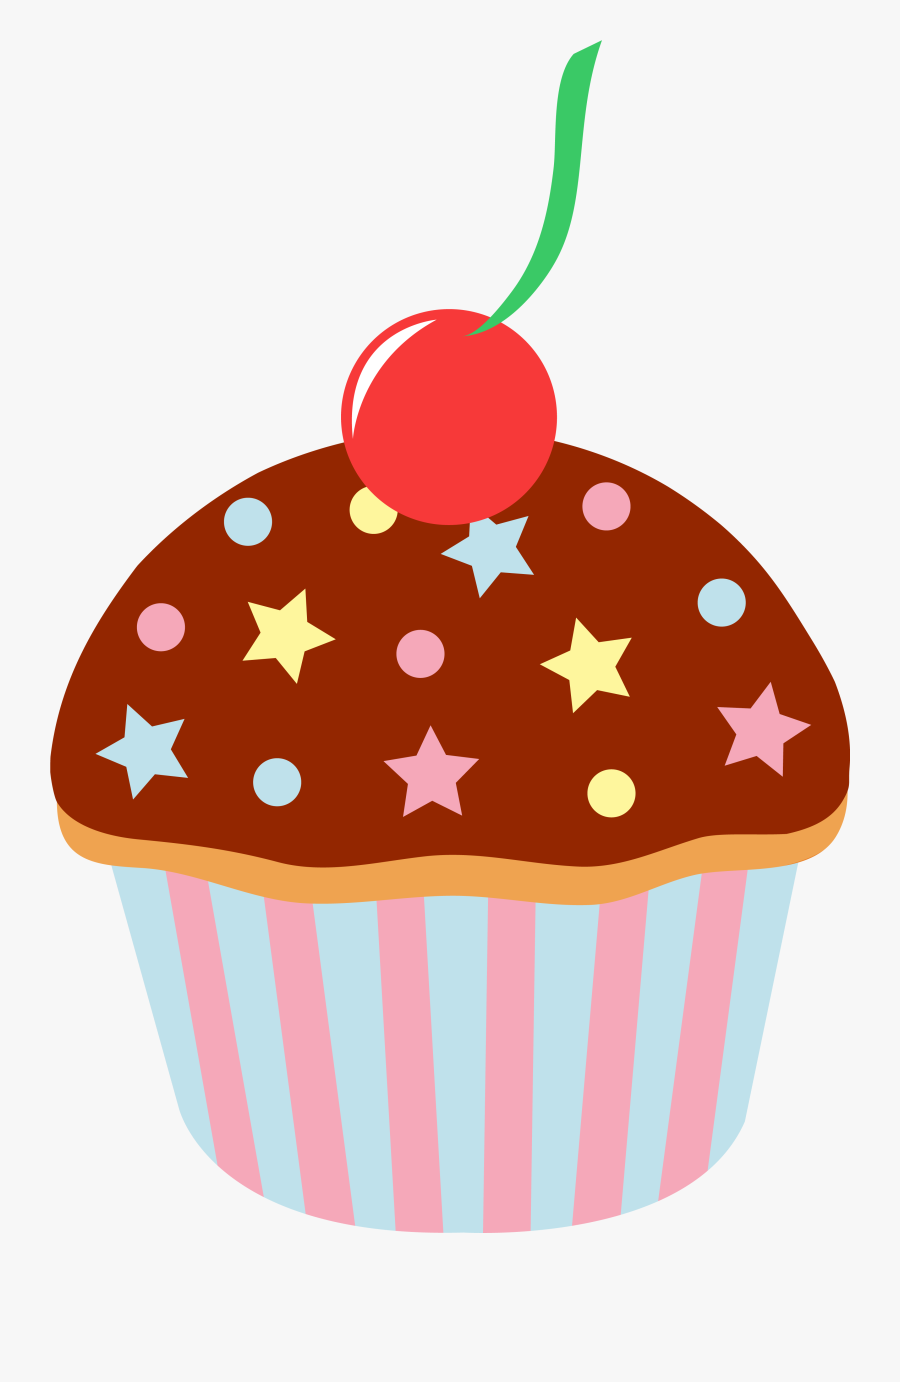 Cupcake Clipart - Cartoon Cakes And Sweets, Transparent Clipart